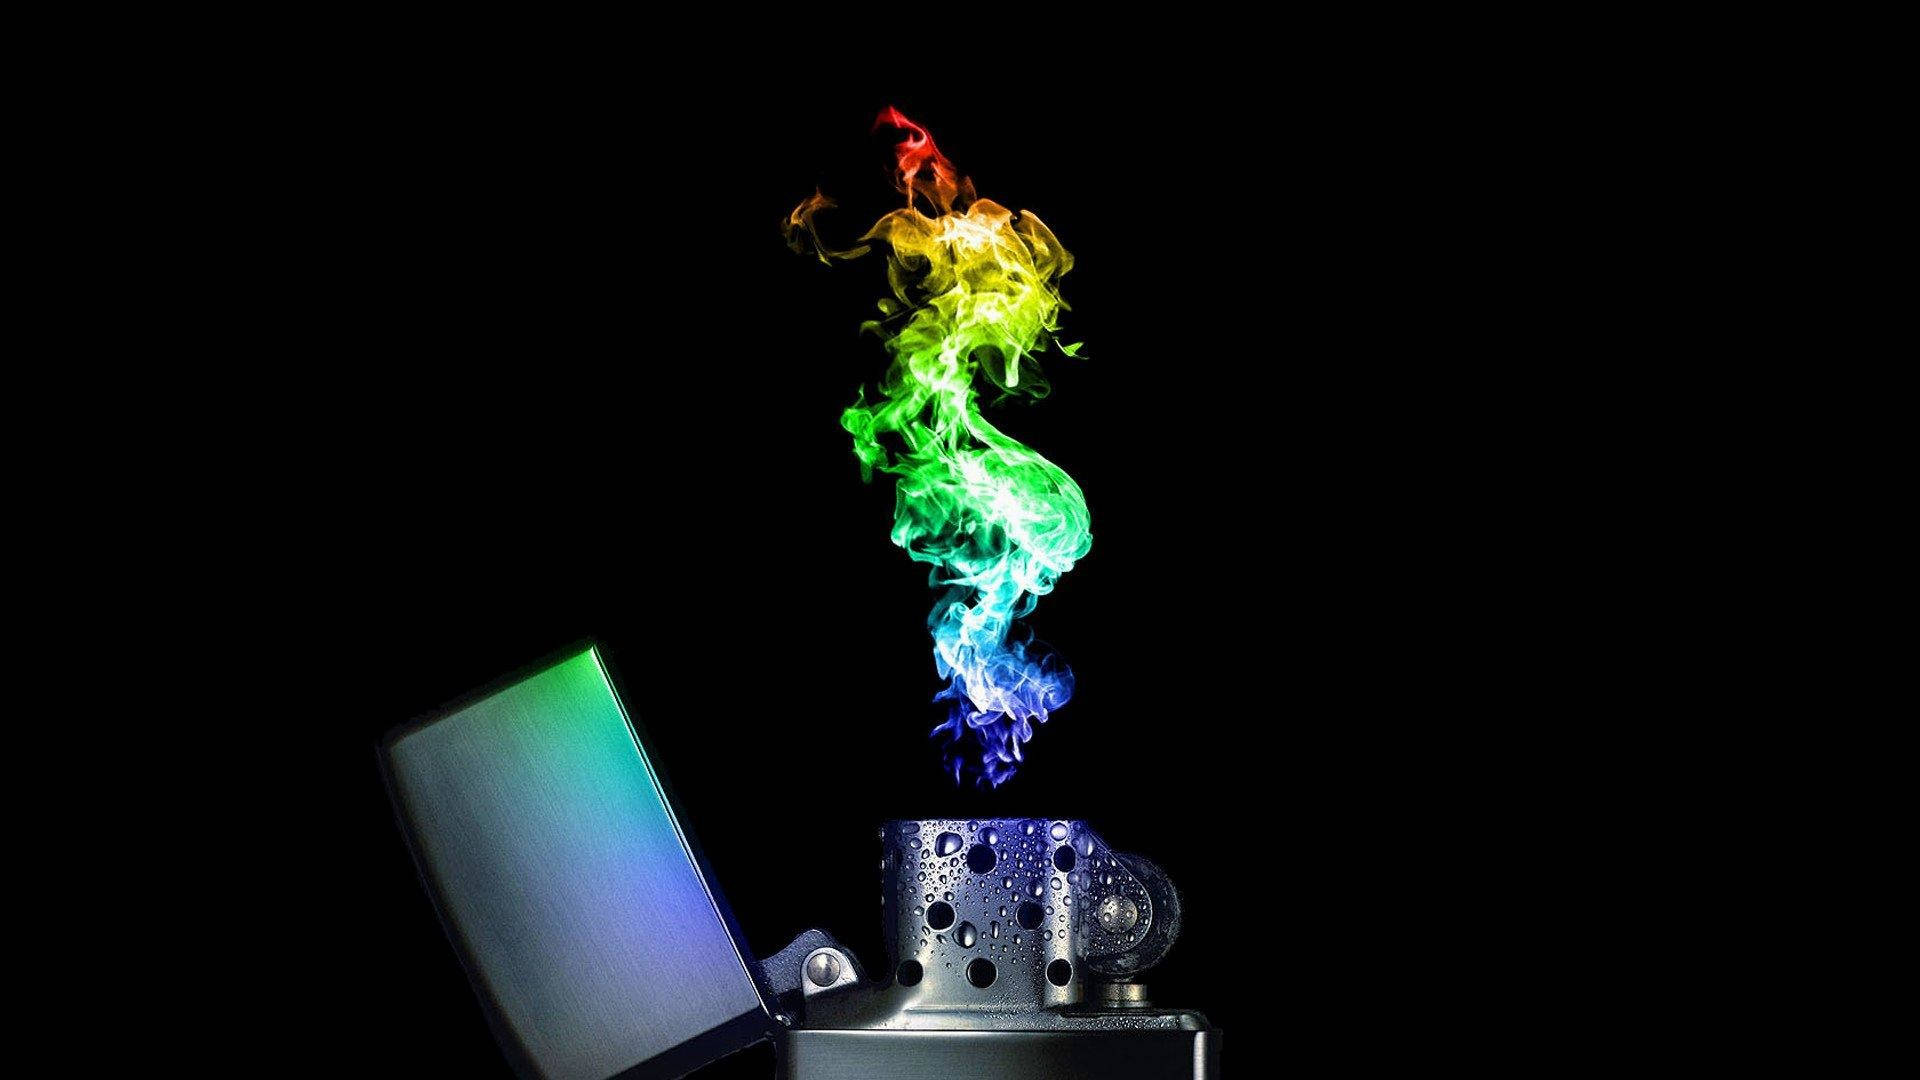 Sick Phone Colorful Lighter Flame Wallpaper